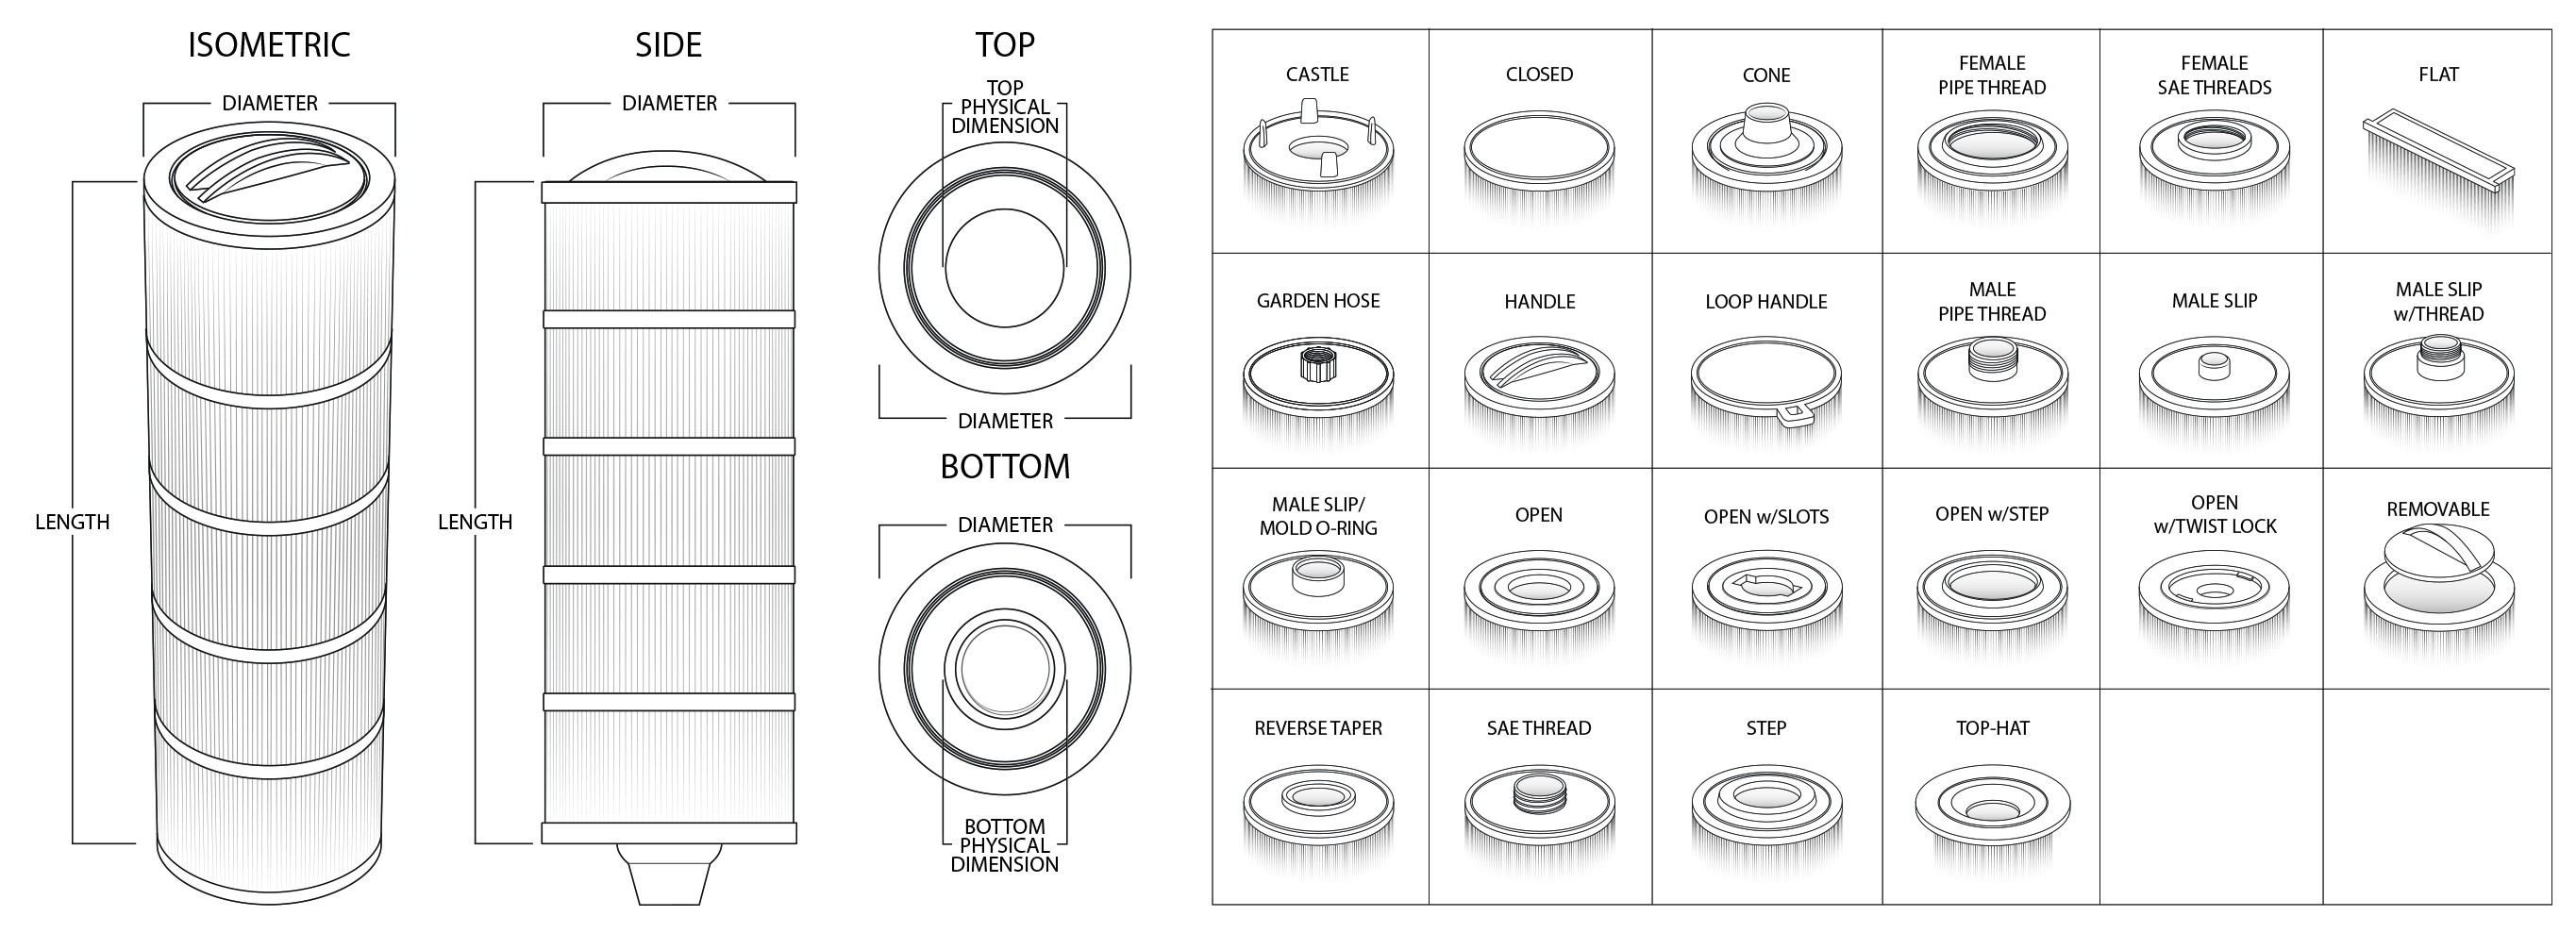 Dimension One Spa Parts Diagram Filters Replacement Cartridges Of Dimension One Spa Parts Diagram